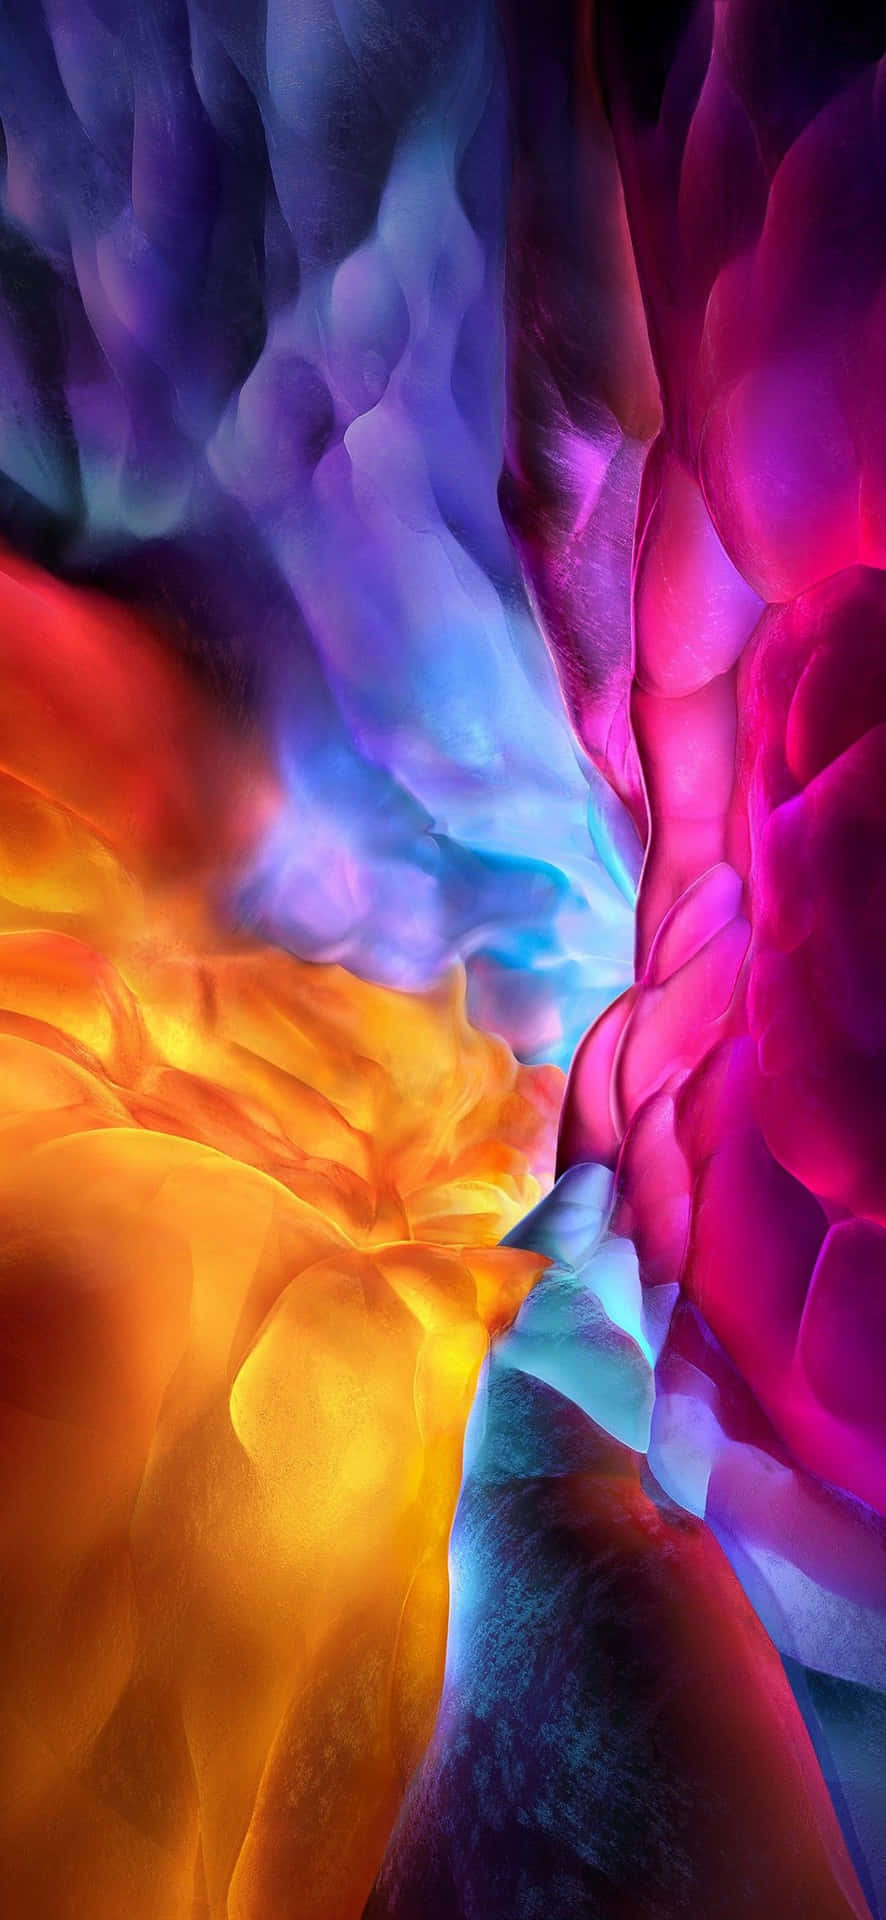 1080x2340 4k Colorful Abstract Cloud Wallpaper